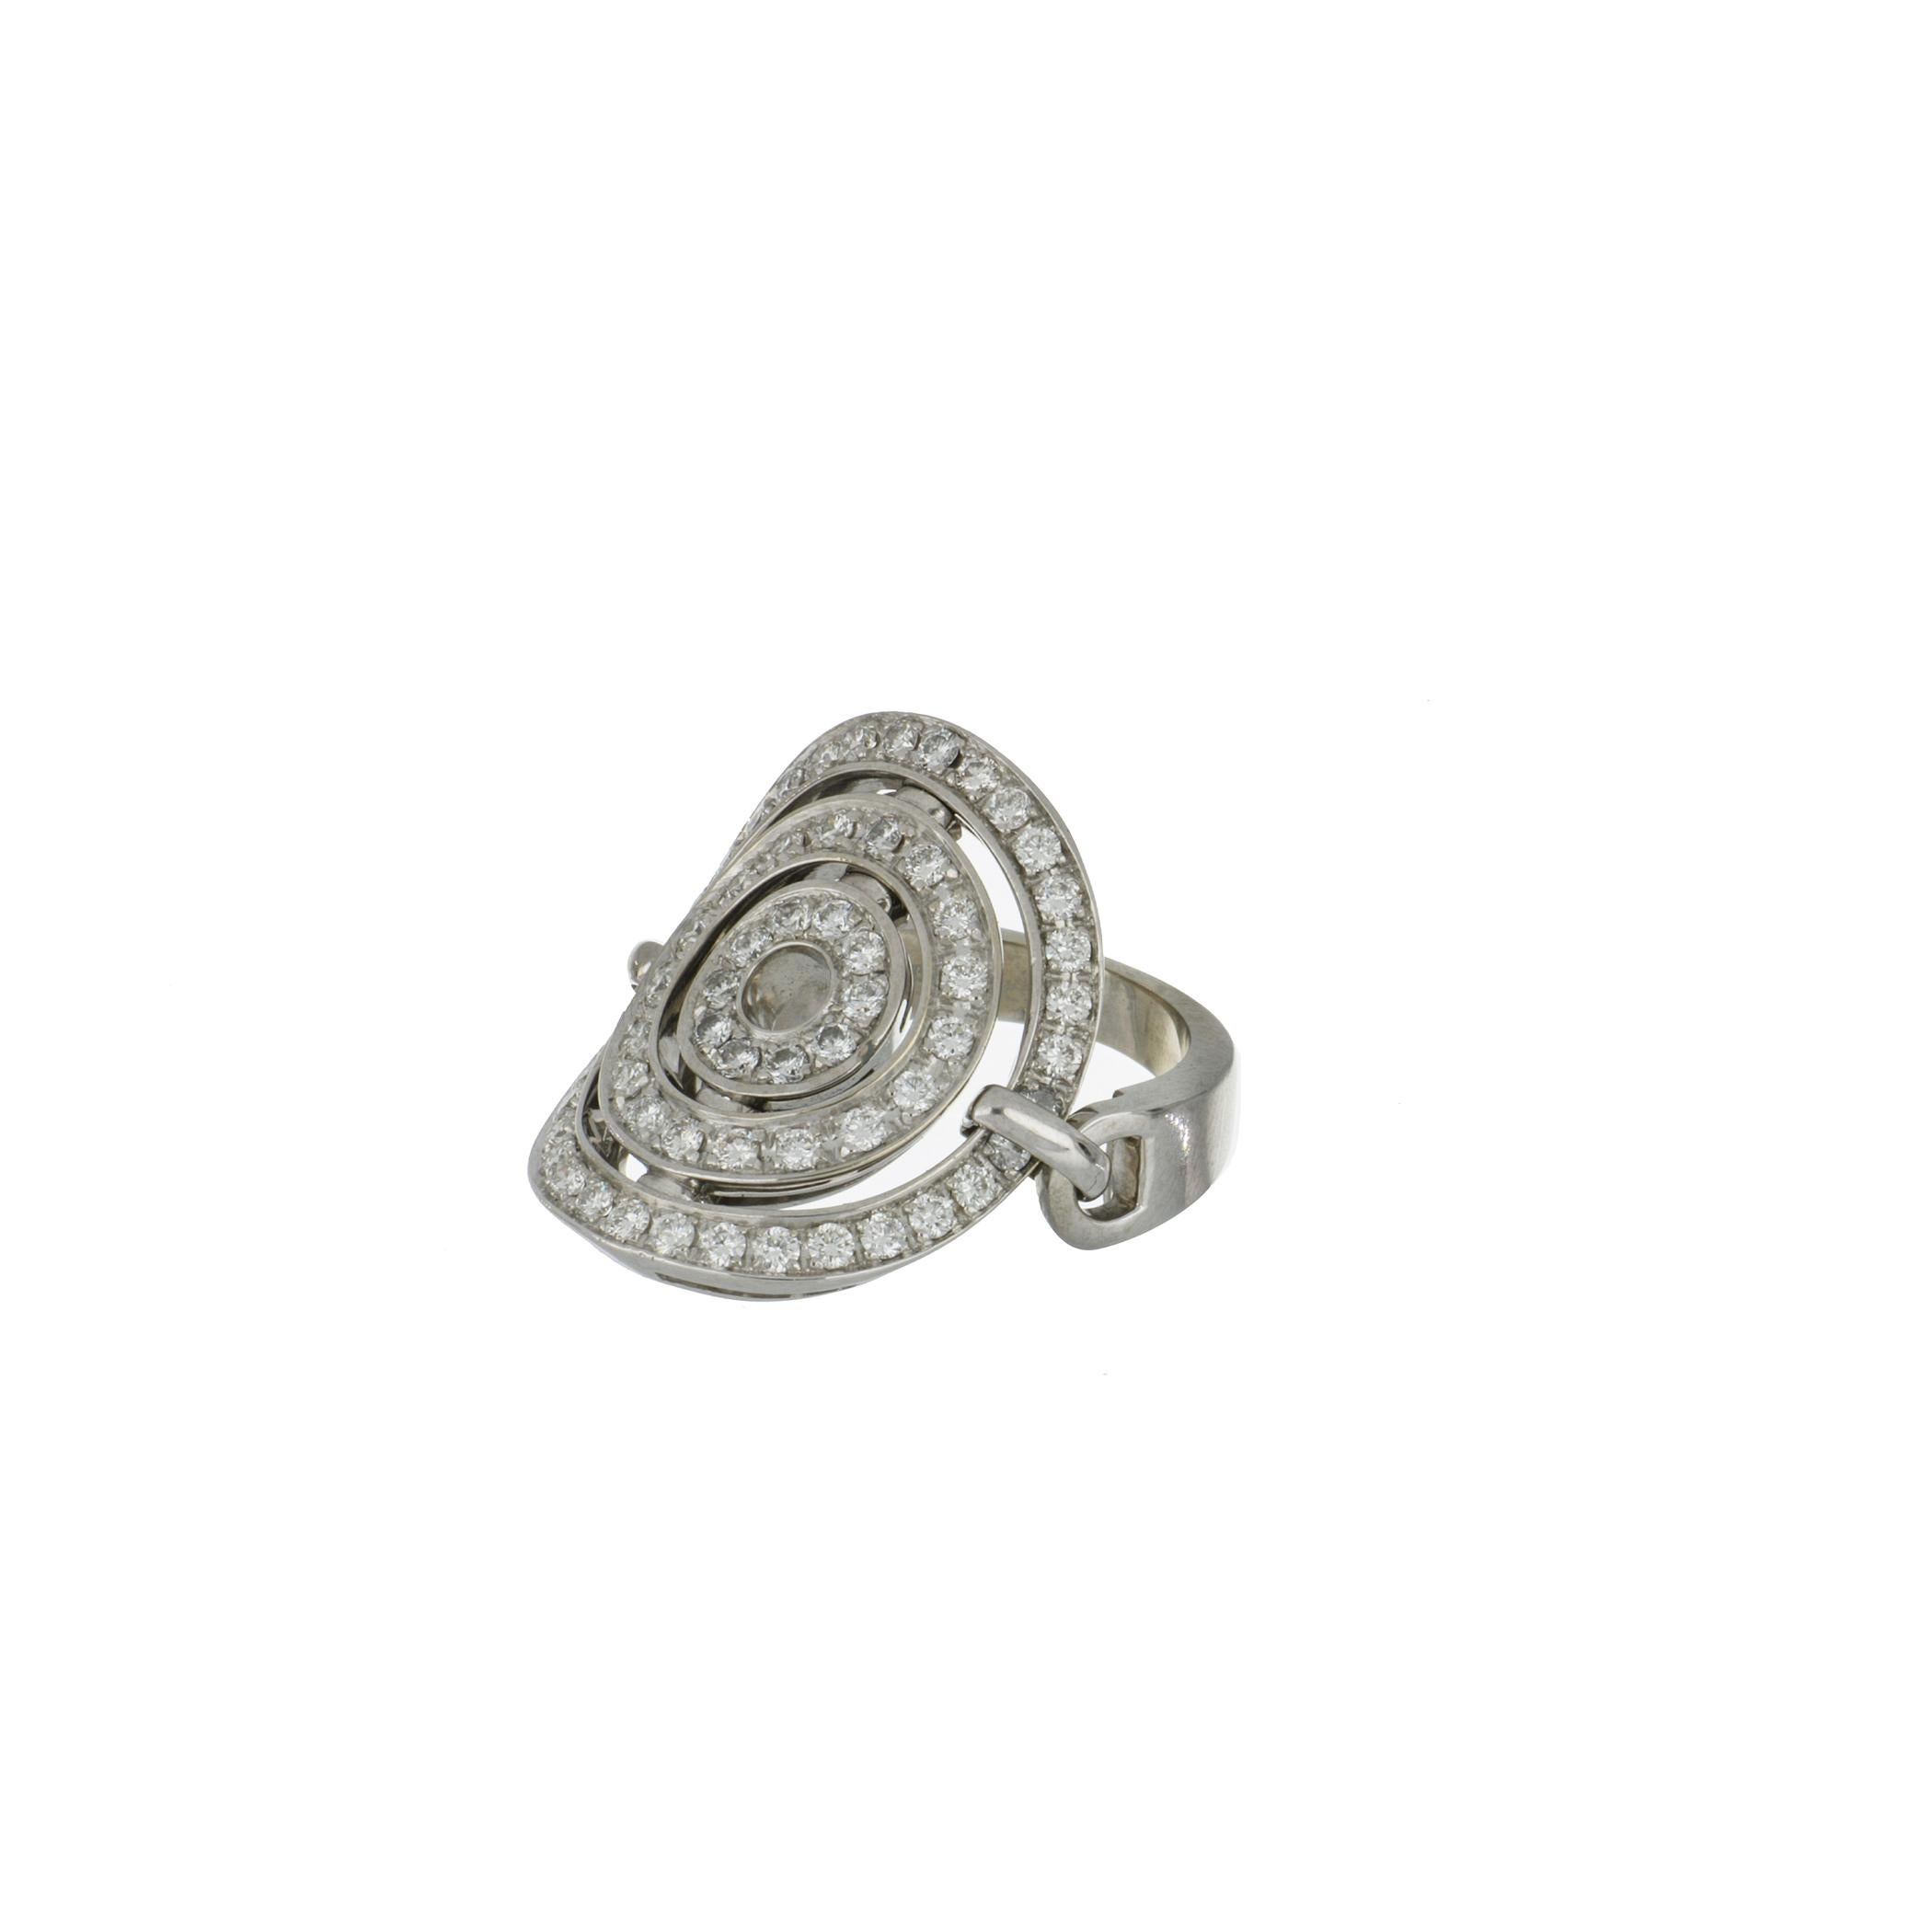 Bulgari Astrale Cerchi ring in 18K white gold with diamonds.  Features open circles within circles with diamonds.  There are sixty-two (62) round diamonds totaling 1.25 carats; E-F color and VVS-VS1 clarity.  Ring is currently a size 5 1/2. 